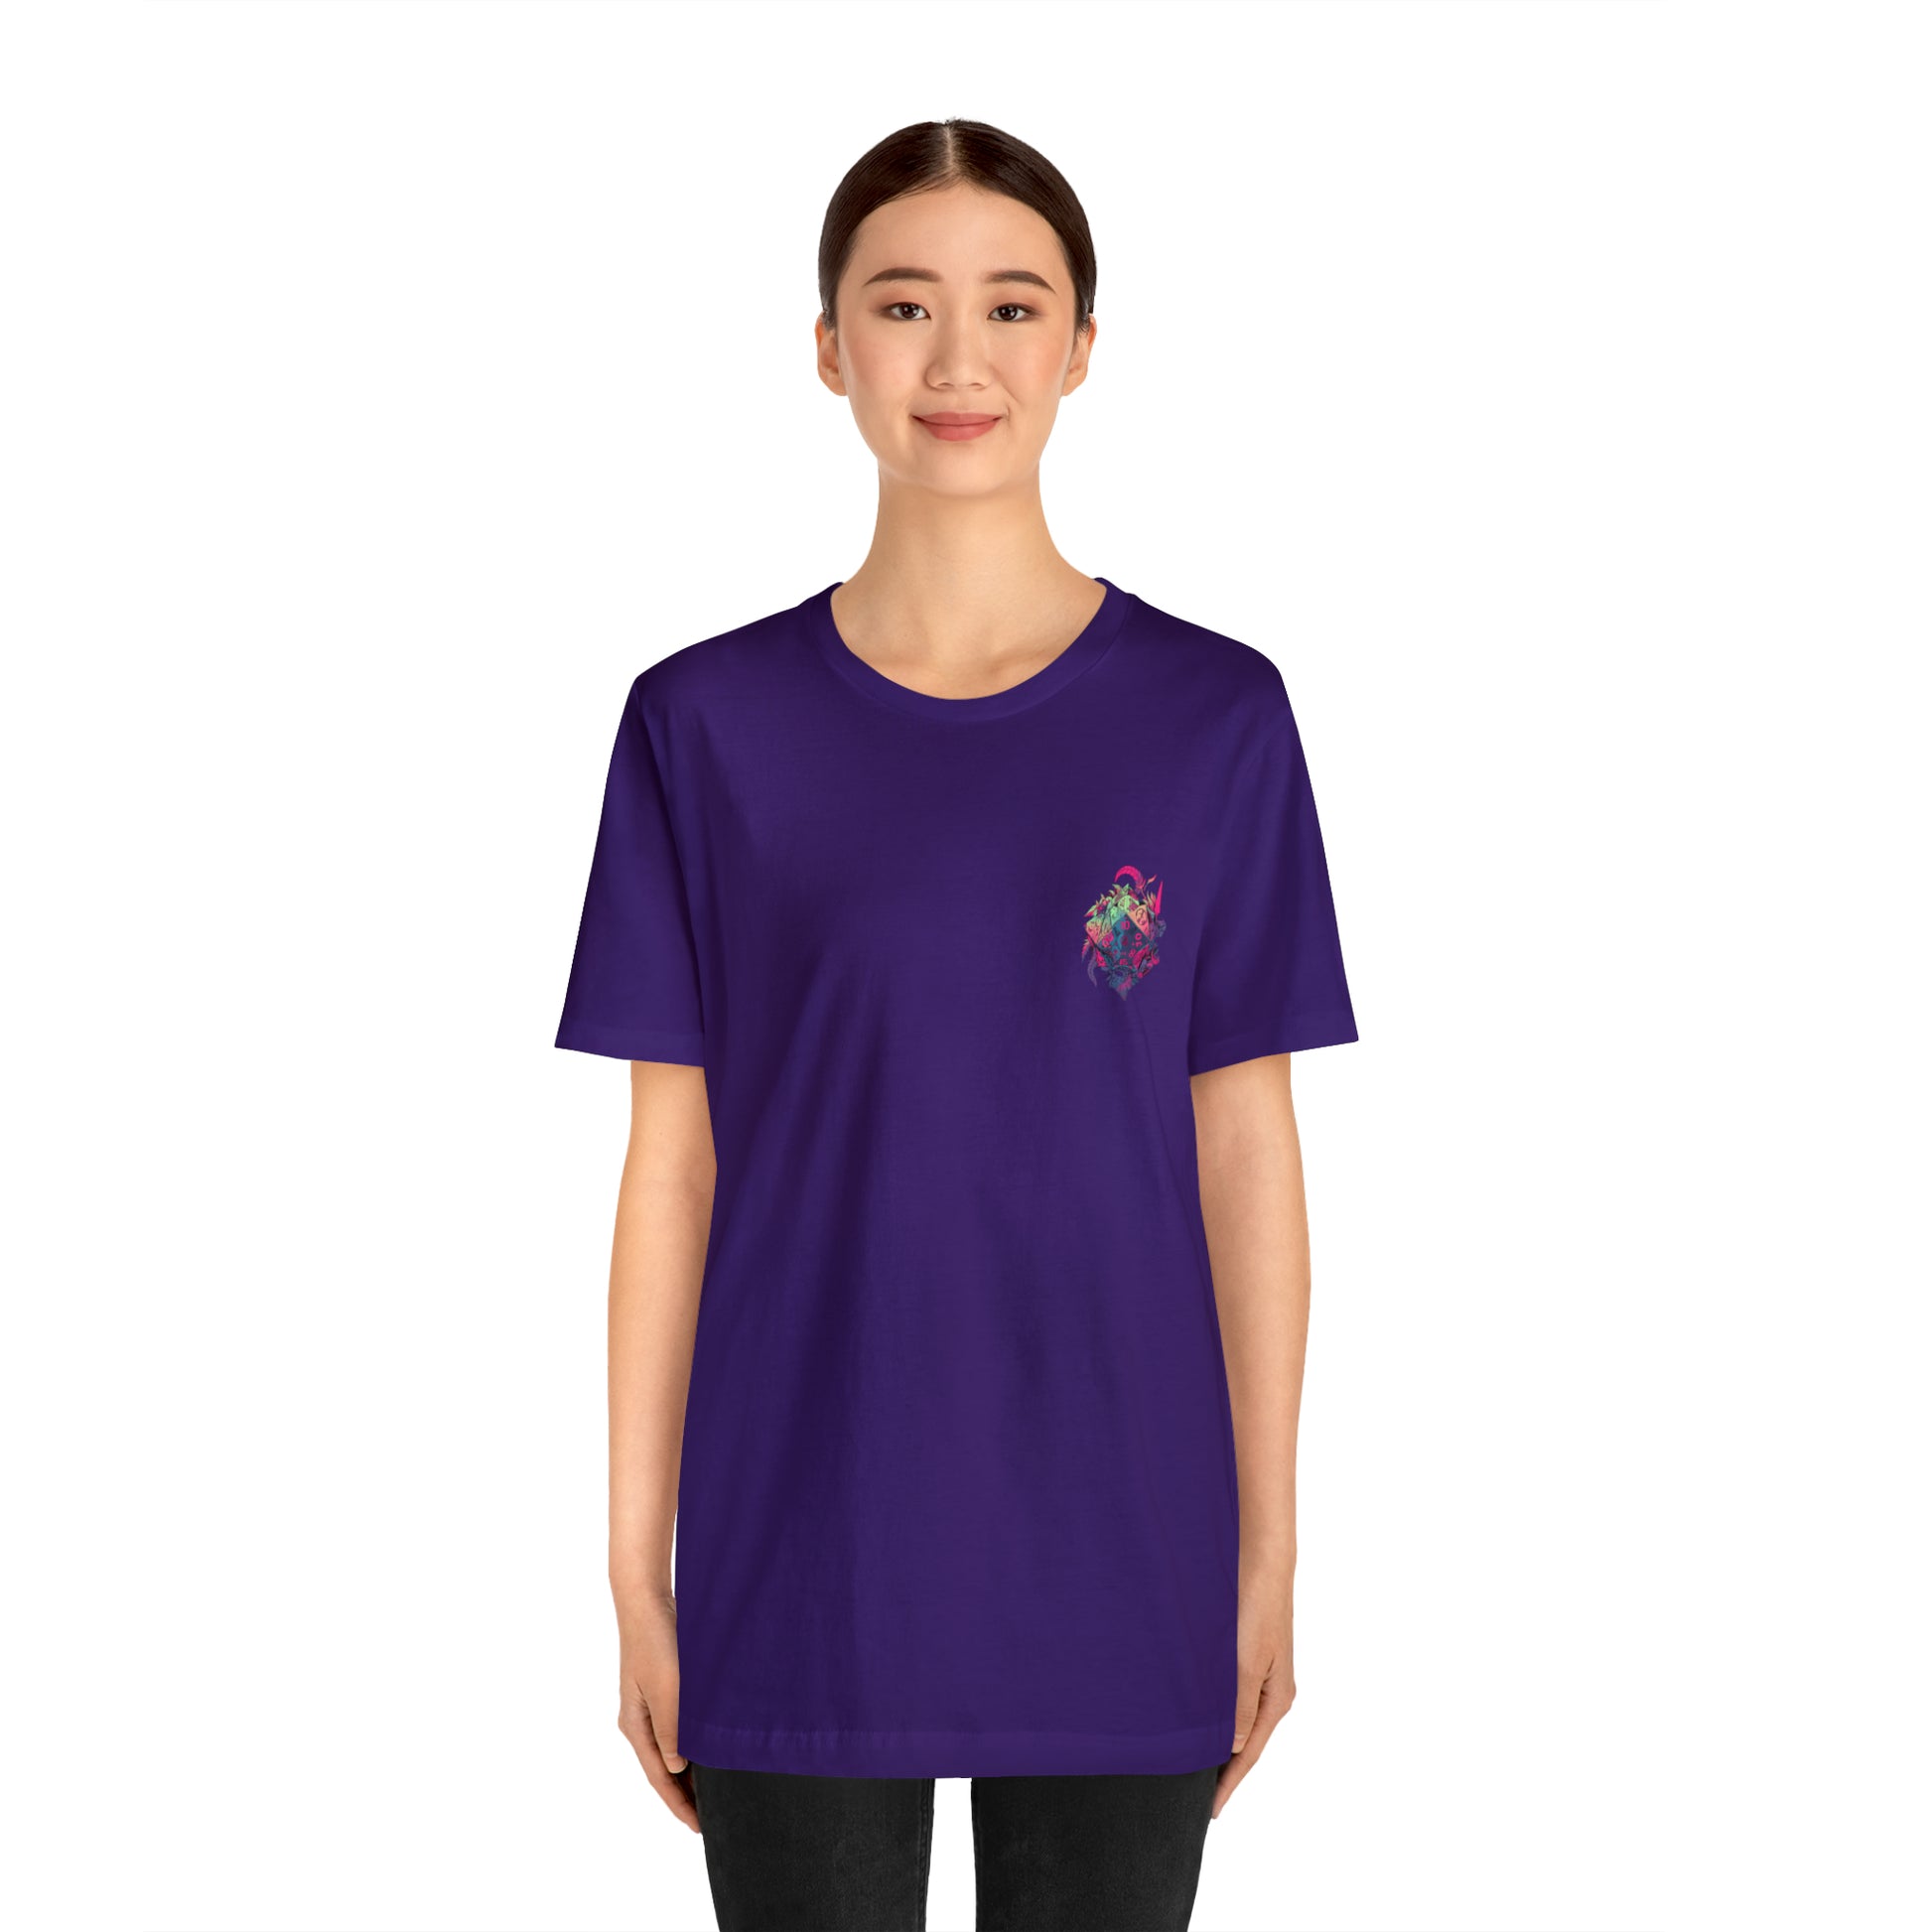 team-purple-quest-thread-tee-shirt-with-small-colorful-dice-in-pink-jungle-on-chest